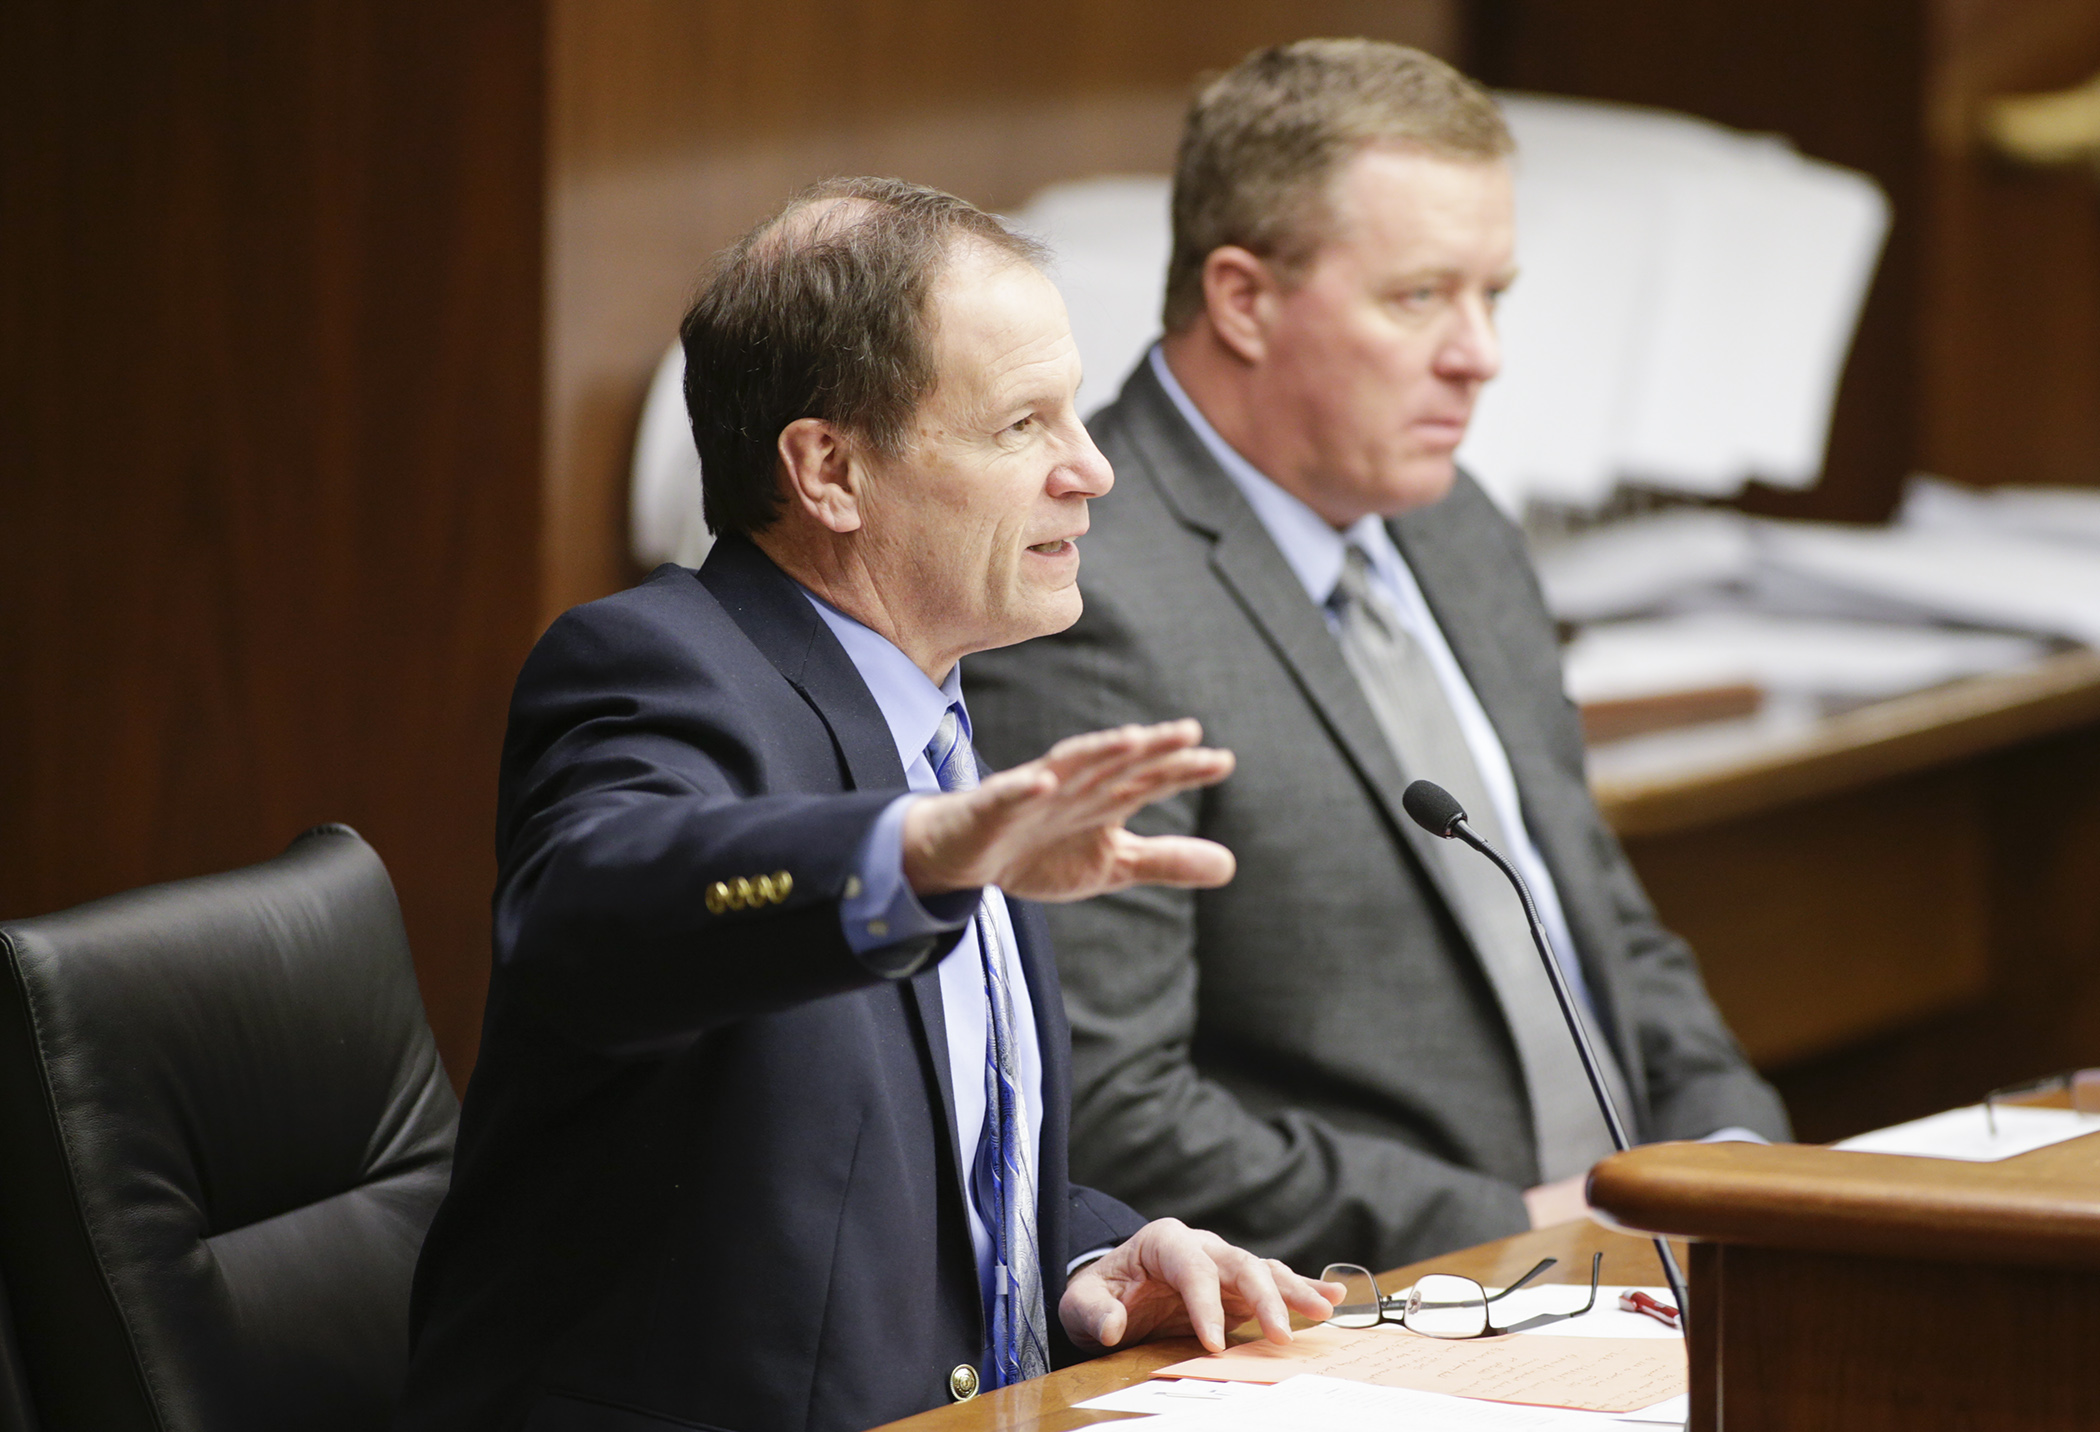 Rep. Paul Marquart testifies March 11 before the House Property and Local Tax Division on HF1163, which would increase appropriations for city local government aid and county program aid back to 2002 levels. Photo by Paul Battaglia